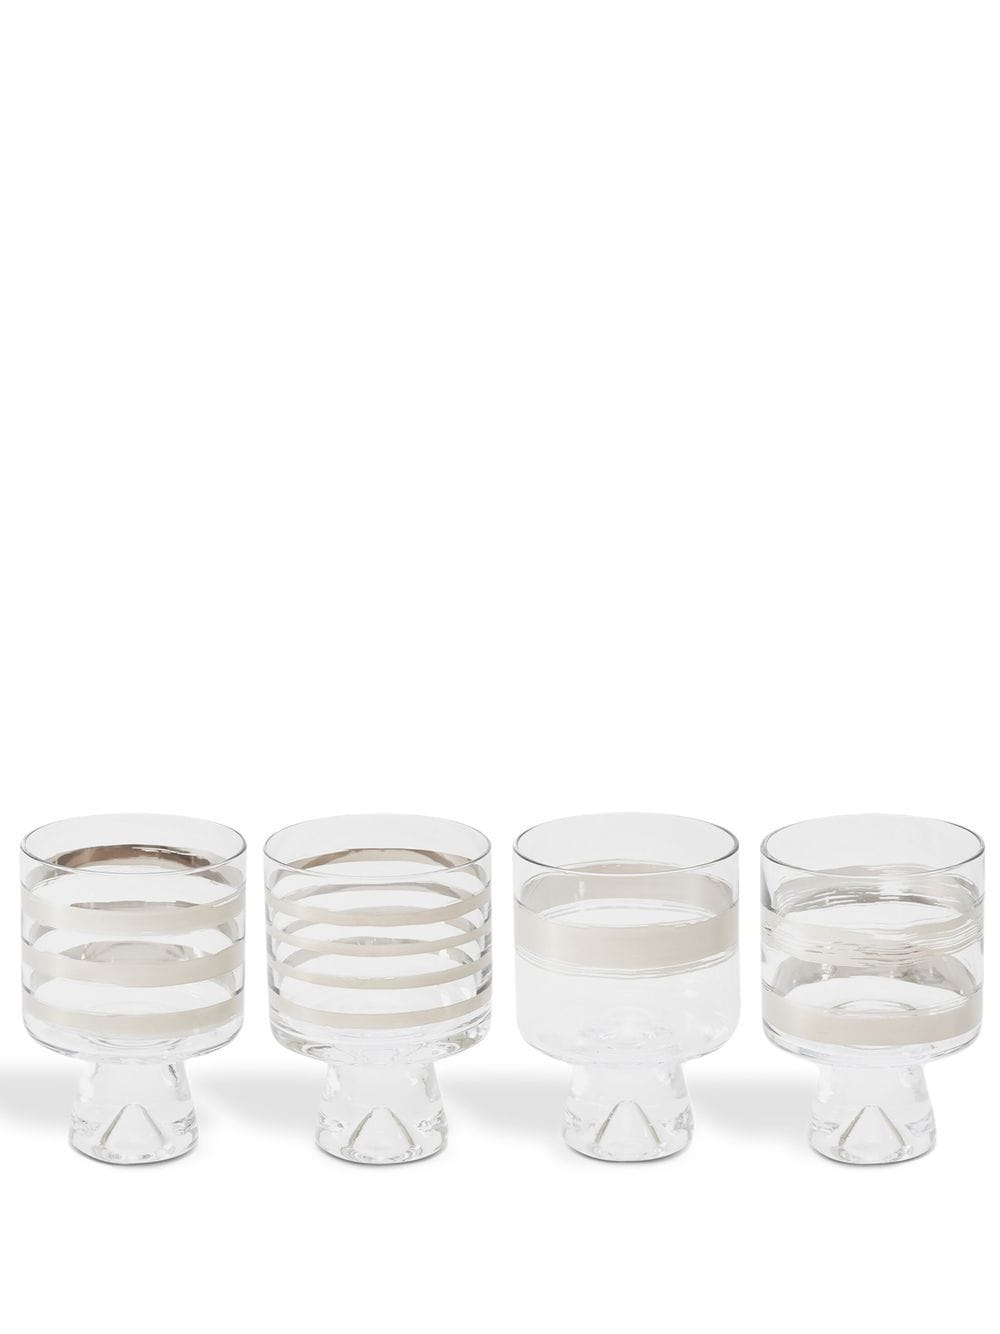 Tom Dixon Low Ball Glass Set In White